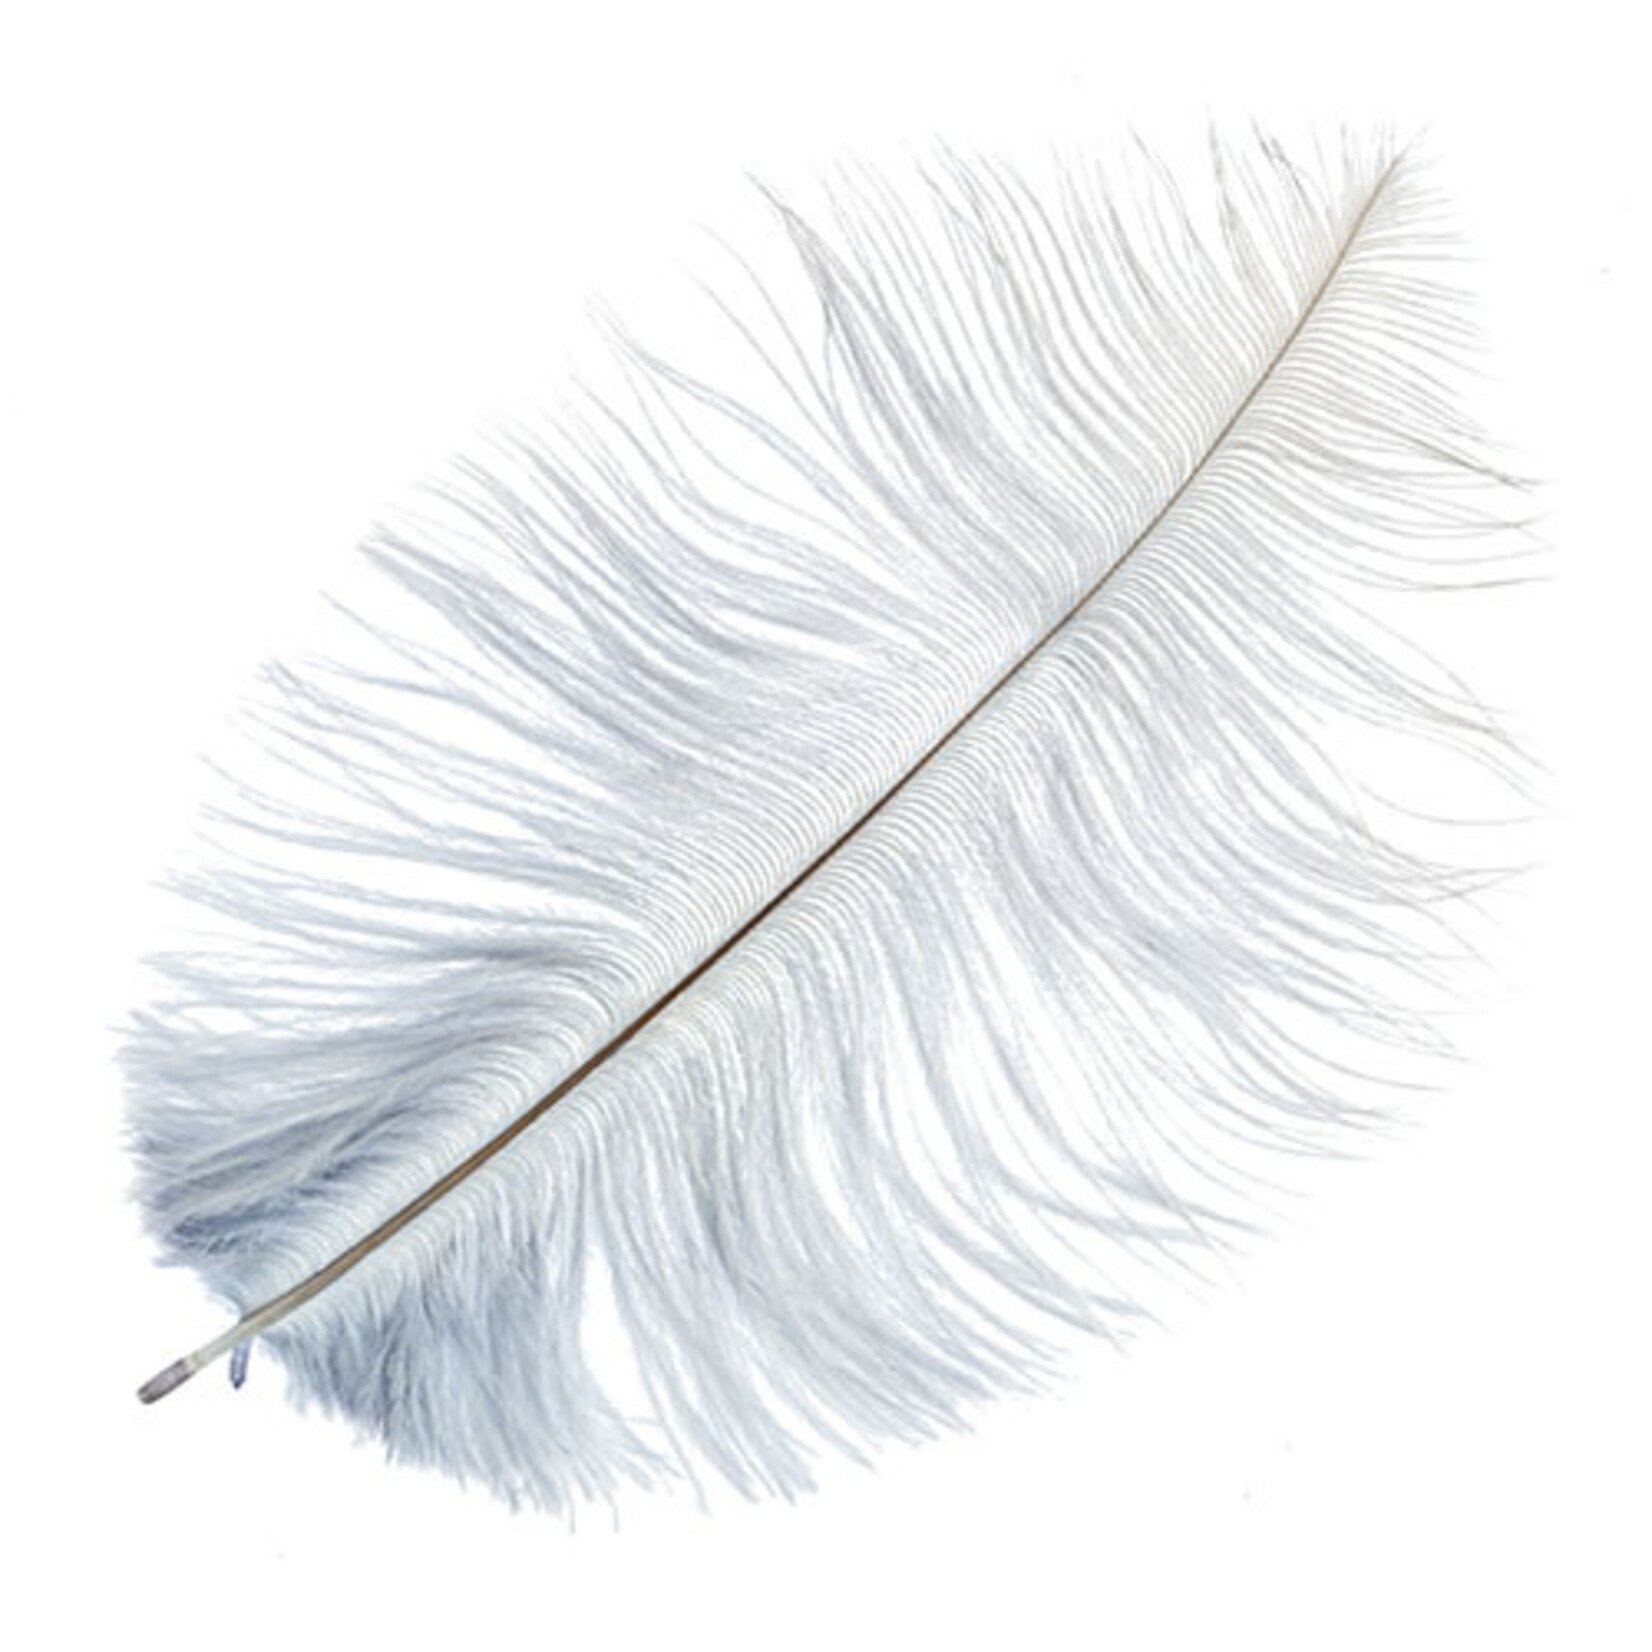 Ostrich Drab Plumes 6-8 Inch (12 pieces) Silver